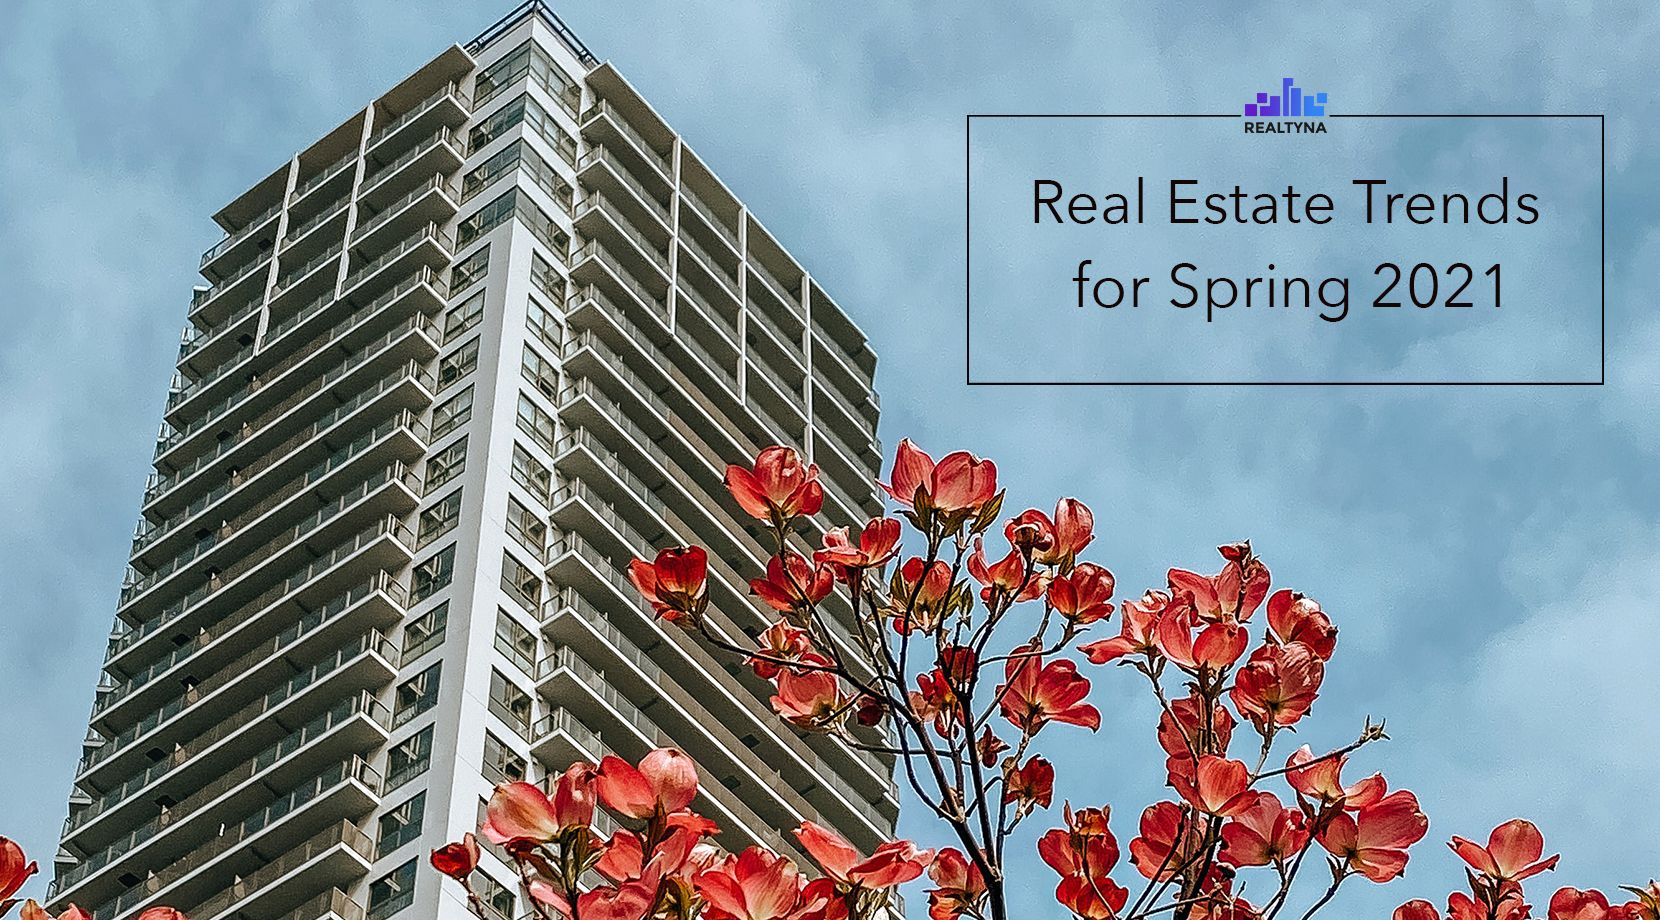 The spring real estate trends in 2021